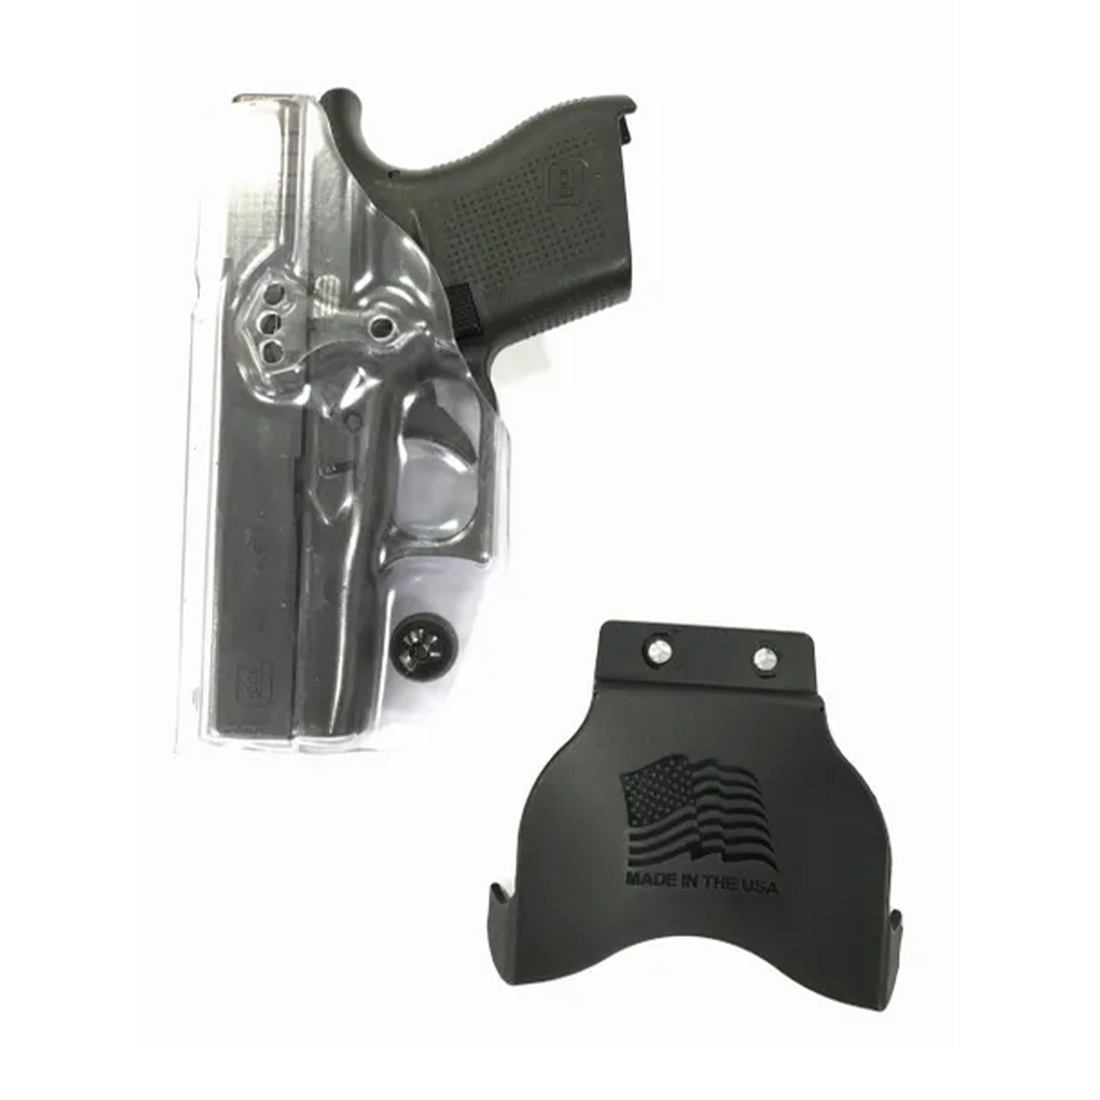 Rock Island Armory OWB Paddle Holsters